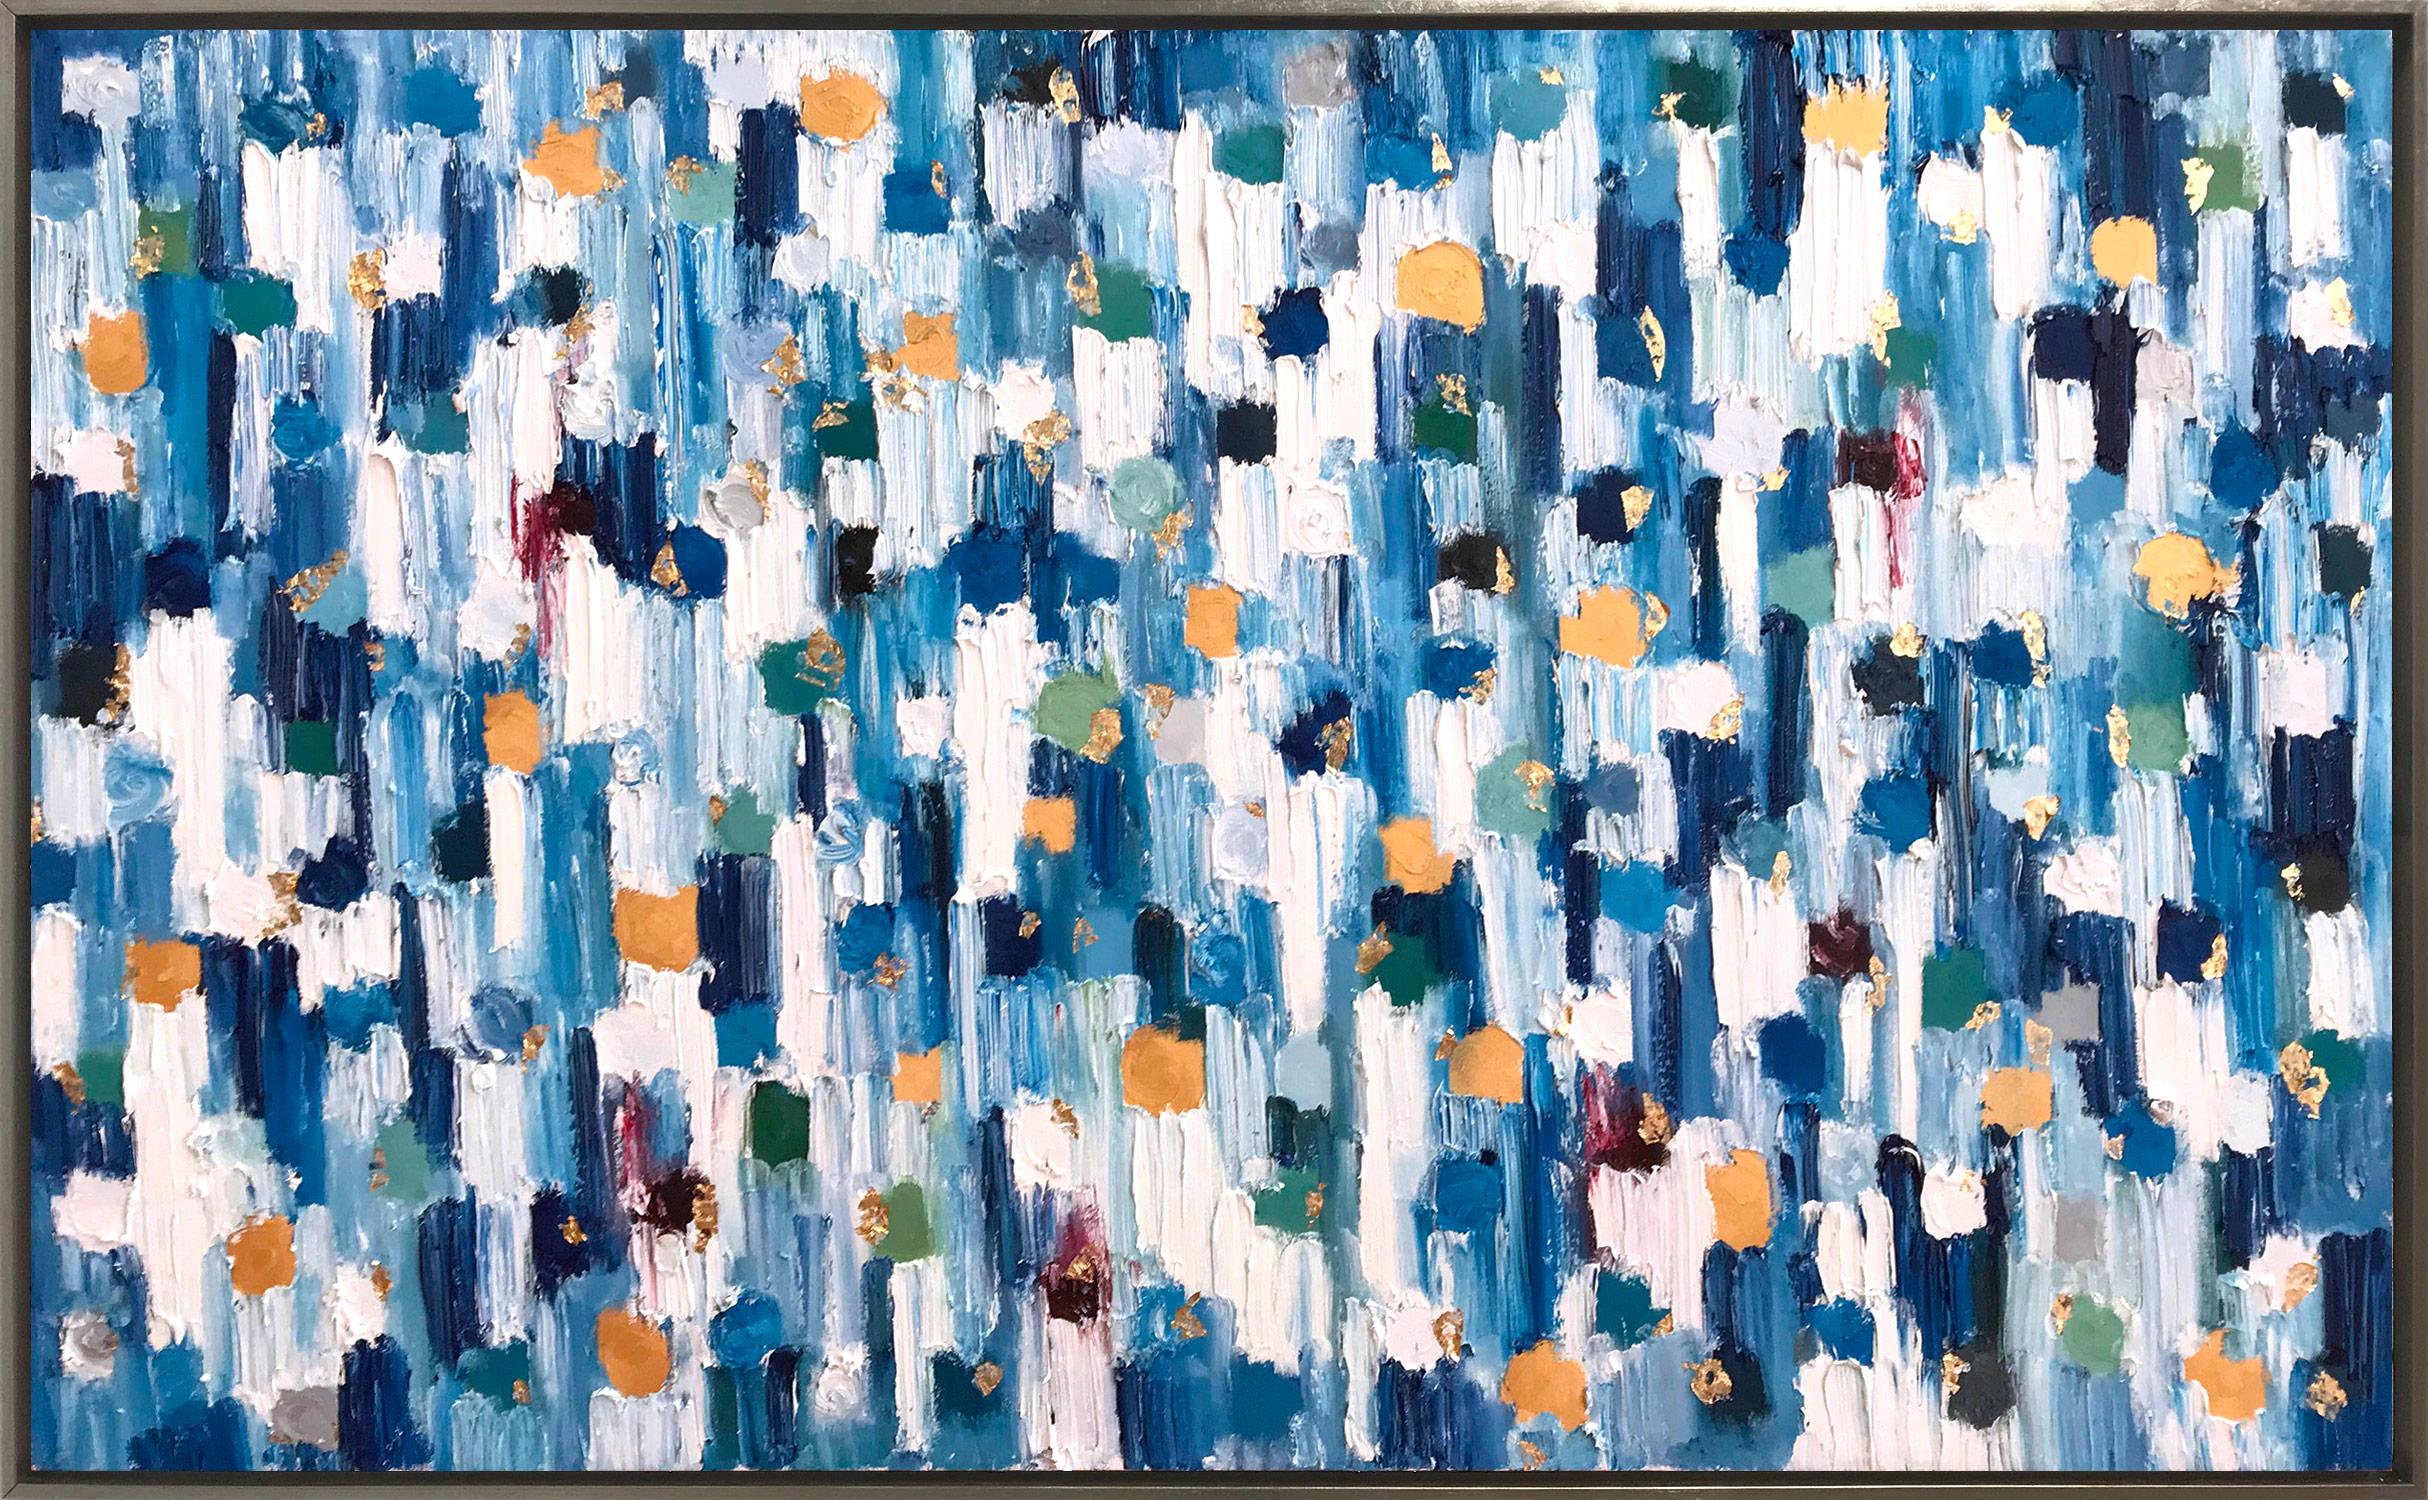 Cindy Shaoul Abstract Painting - "Dripping Dots - Essex" Colorful Abstract Oil Painting on Canvas